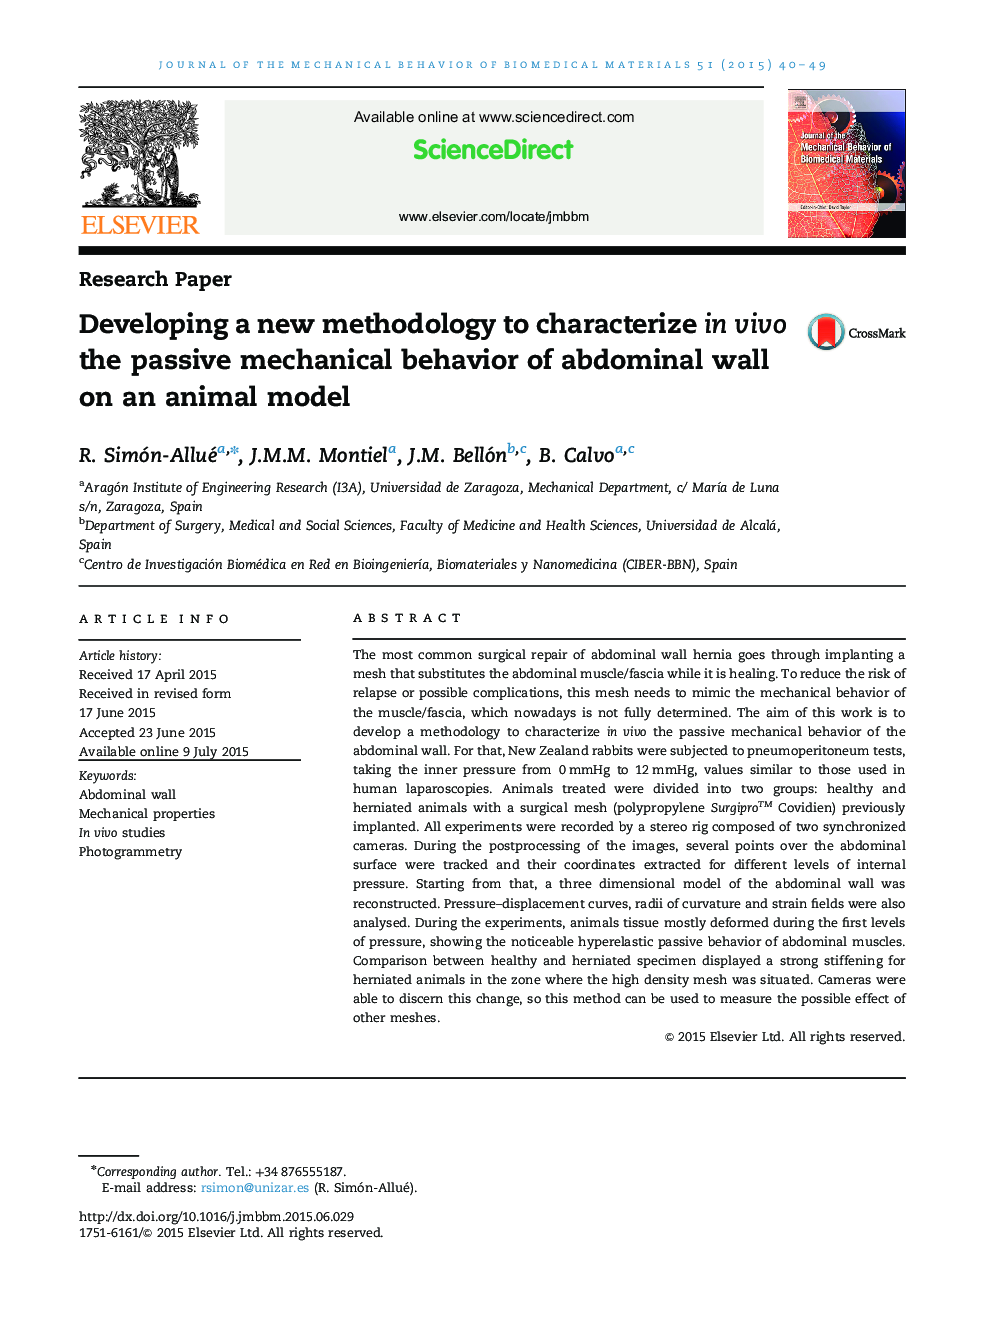 Developing a new methodology to characterize in vivo the passive mechanical behavior of abdominal wall on an animal model